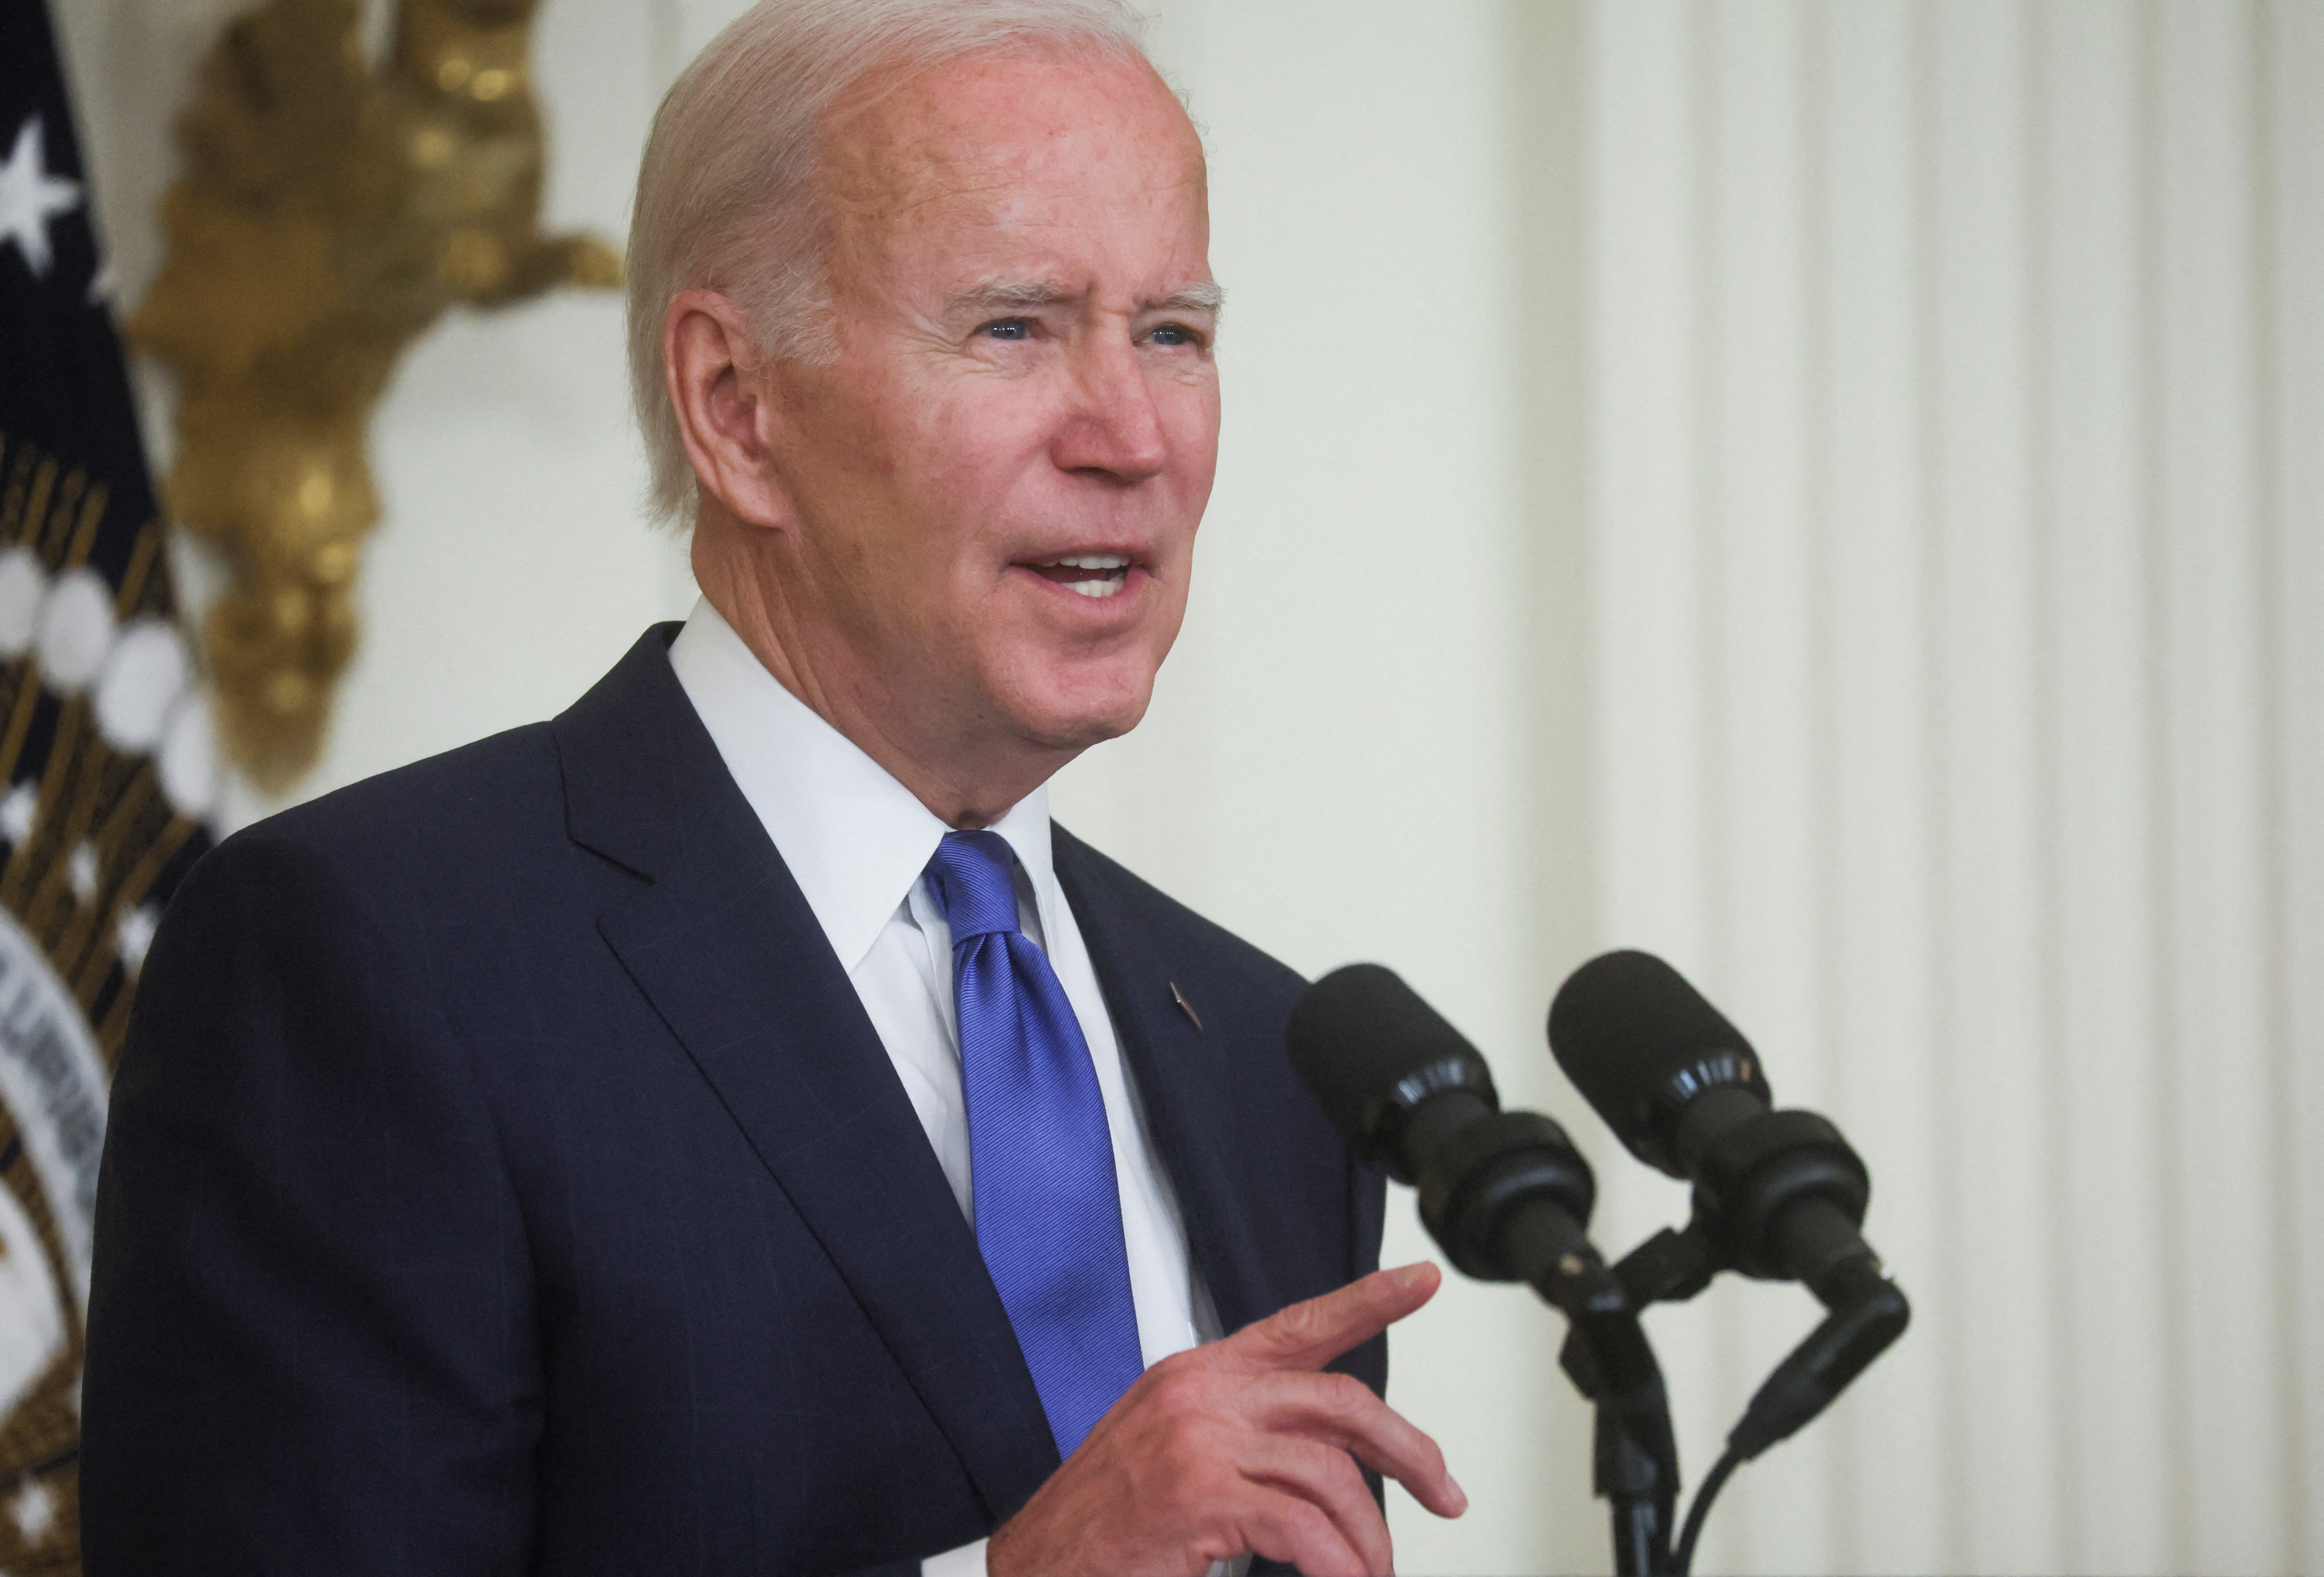 U.S. President Biden speaks during jobs and infrastructure event at White House in Washington